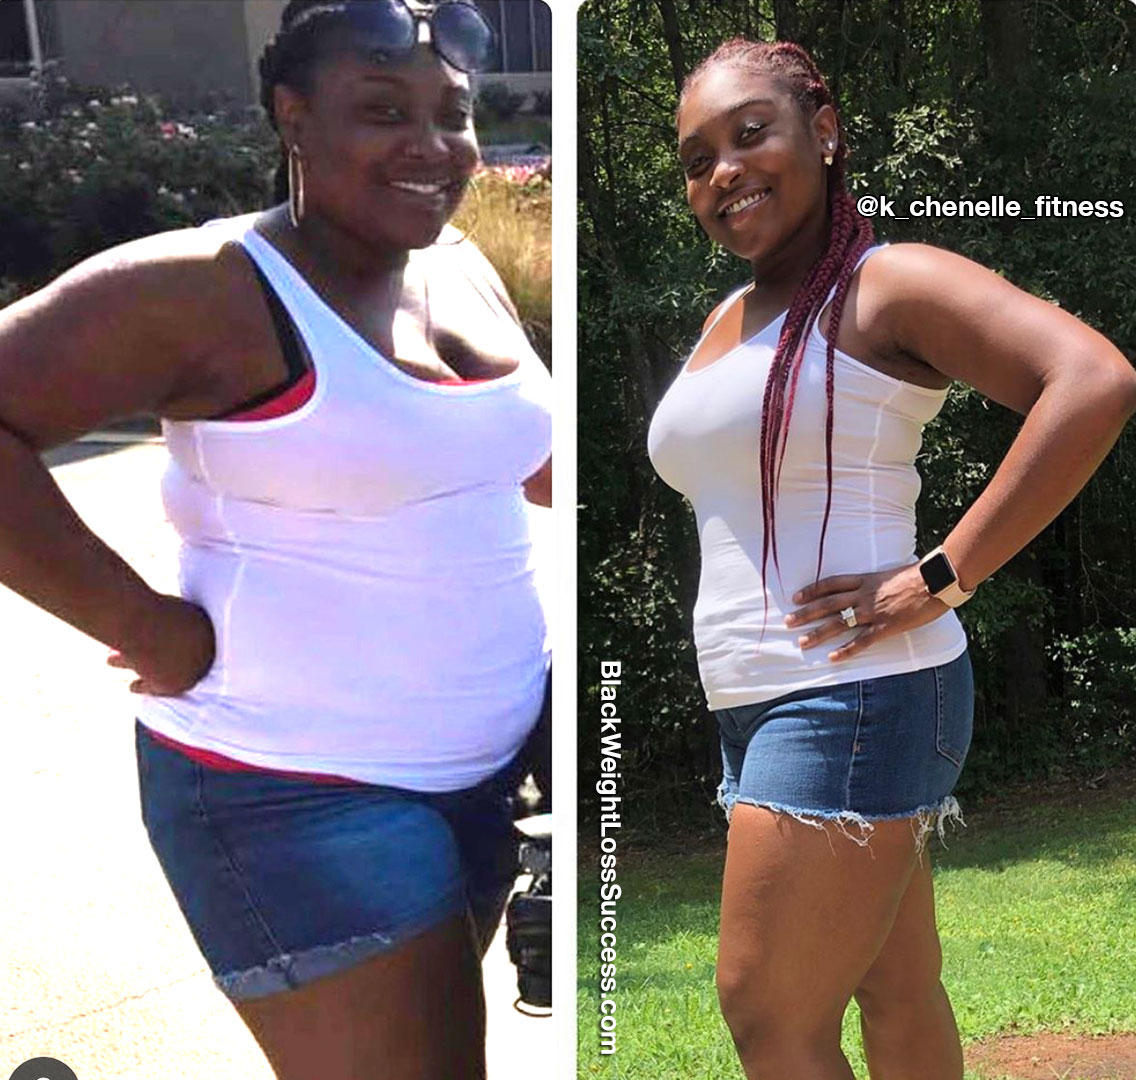 K Chenelle weight loss story